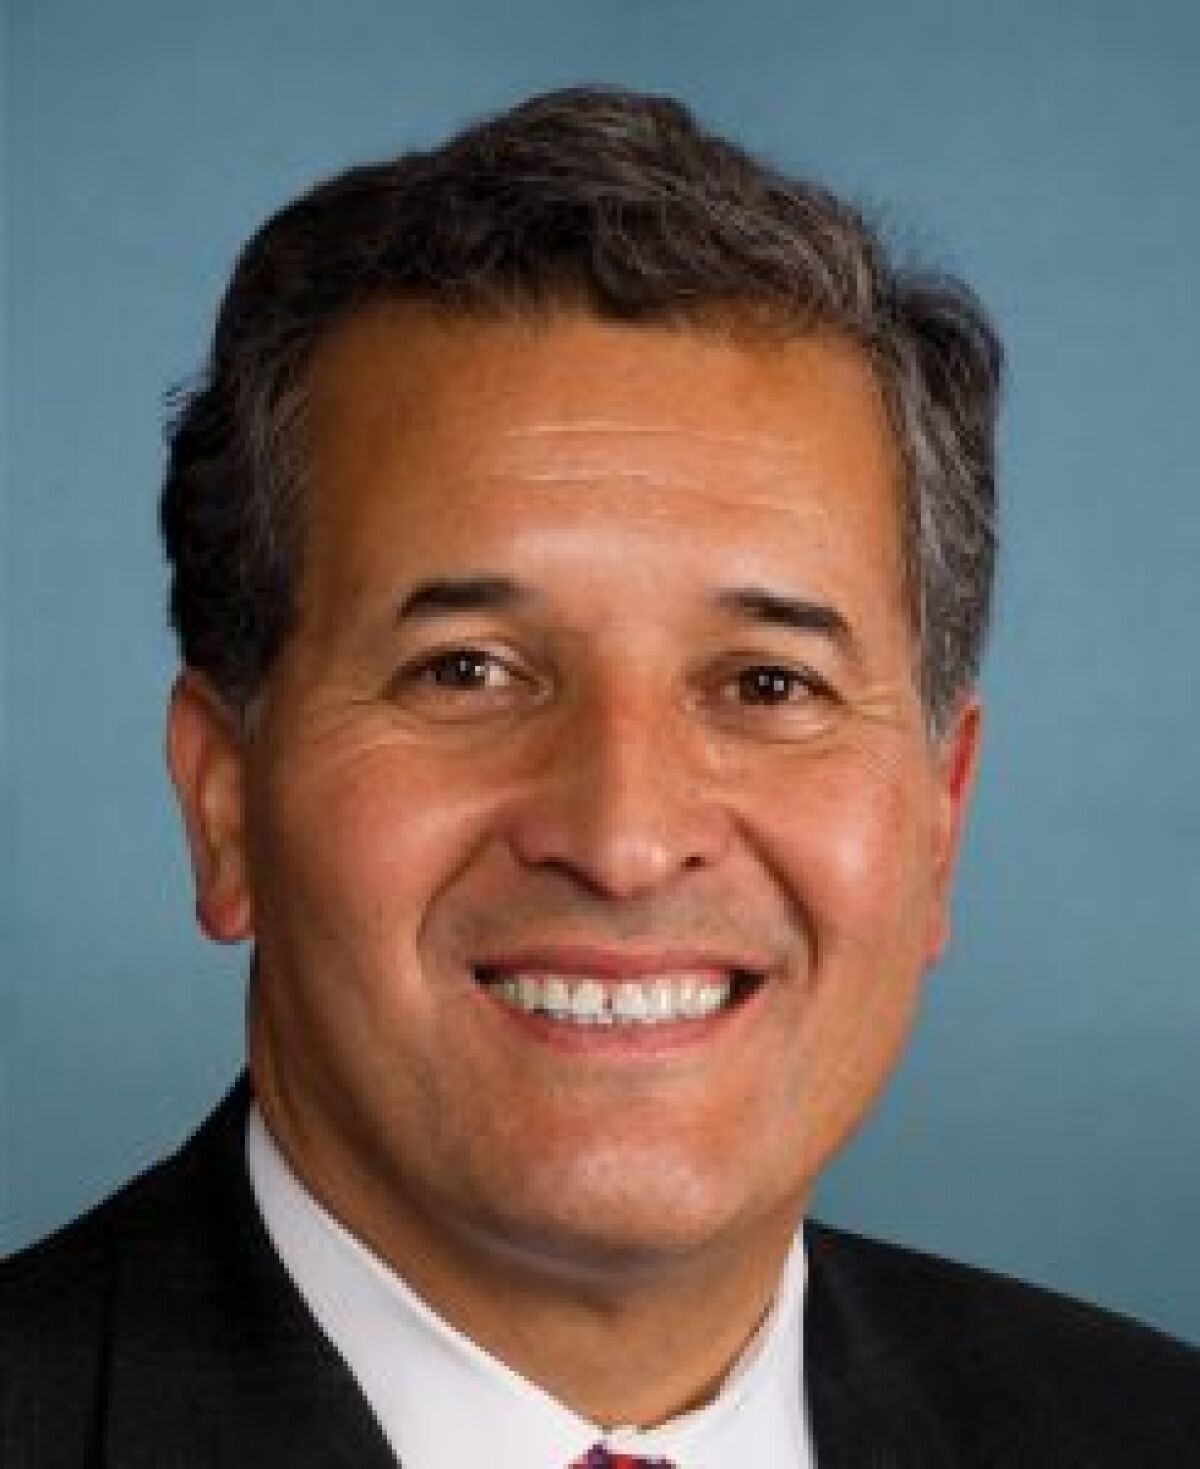 Rep. Juan Vargas is running for re-election in the 51st Congressional District.